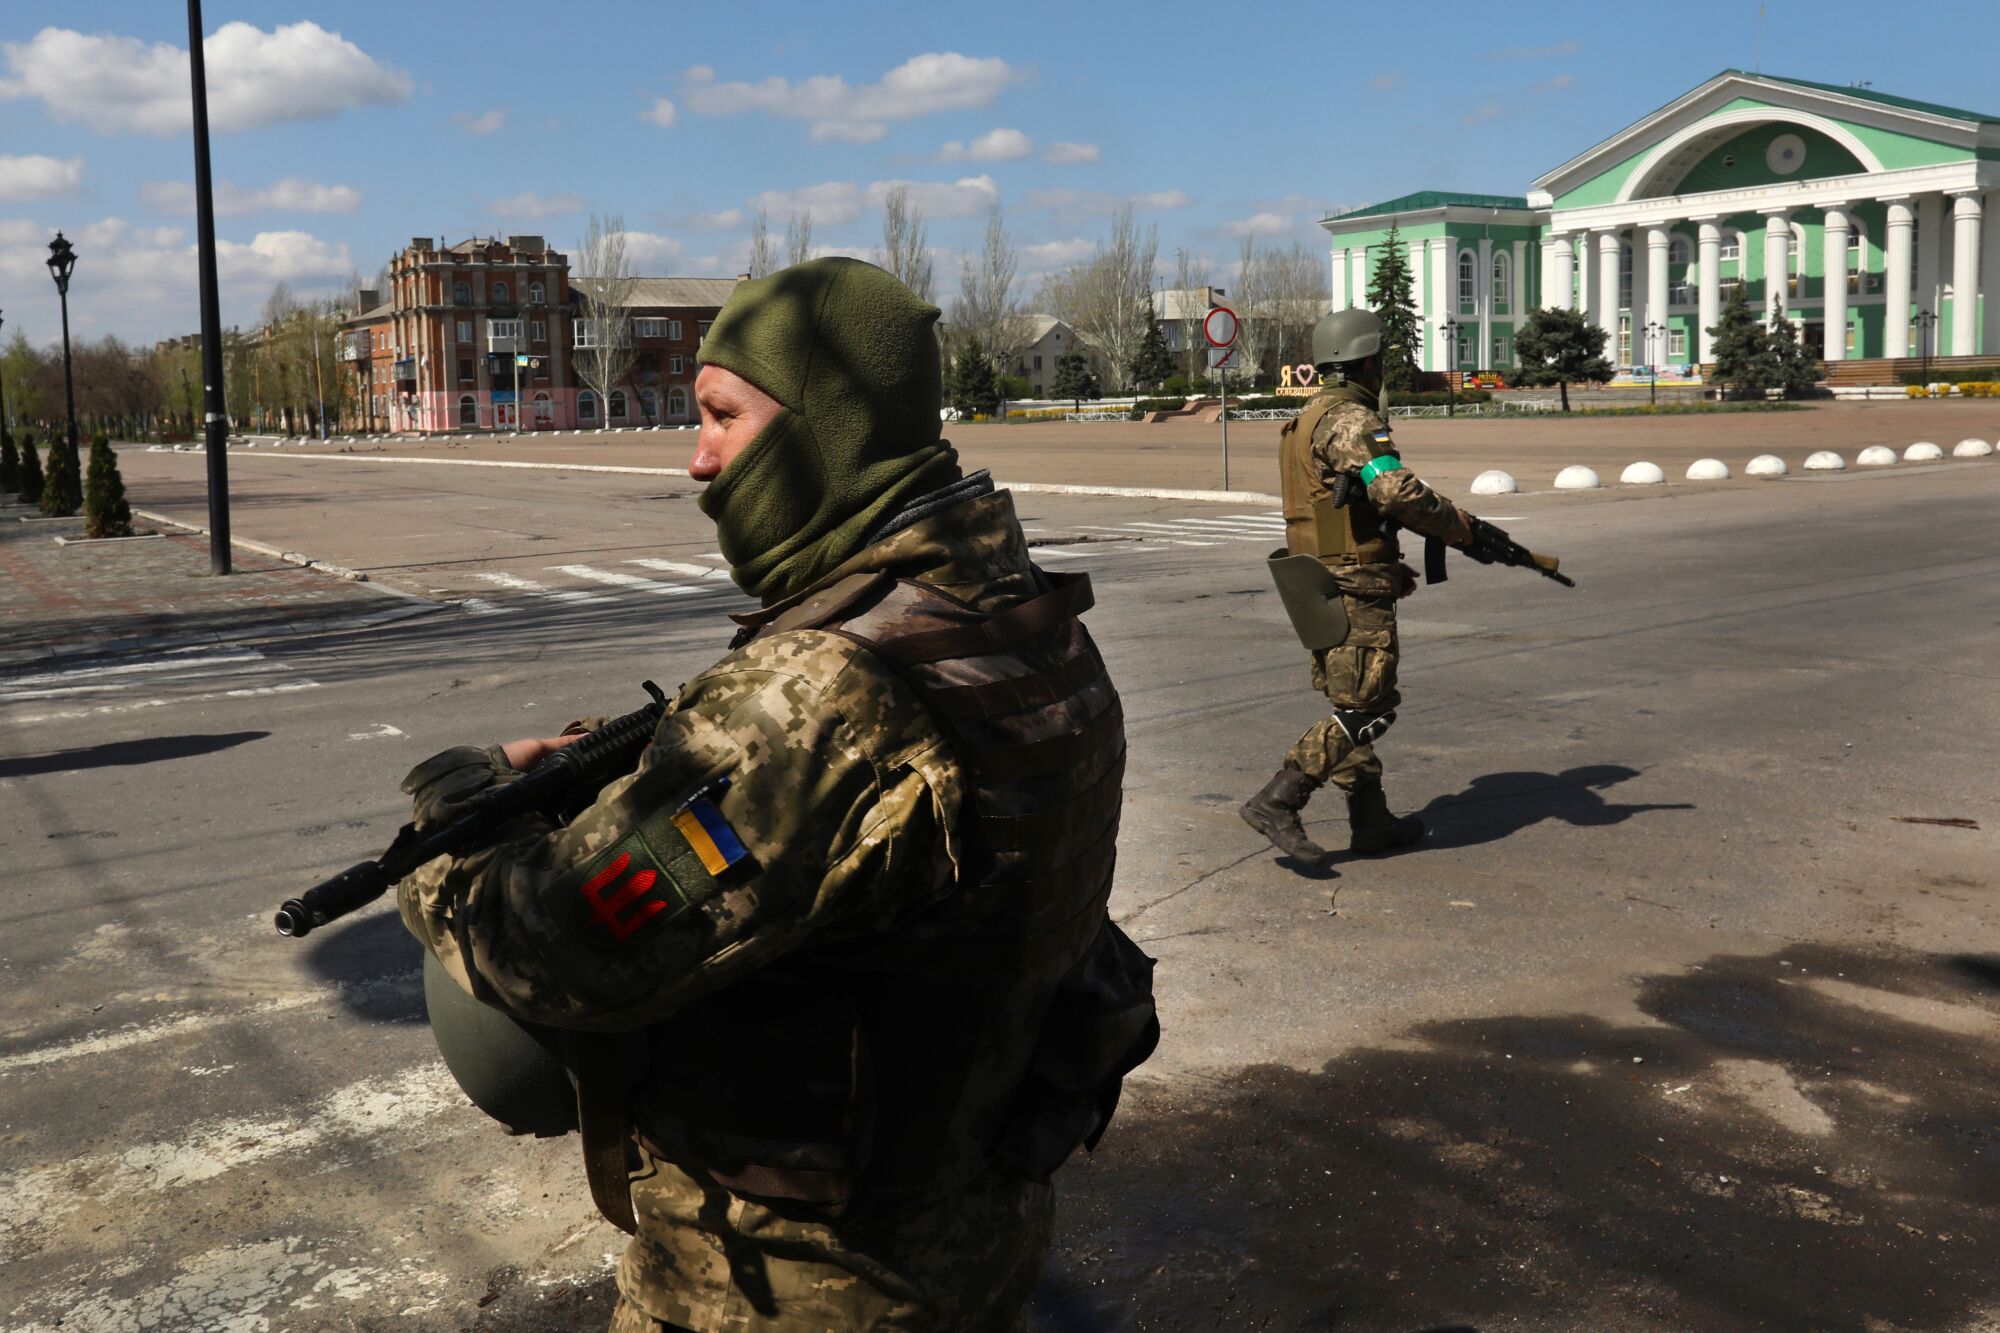 Ukrainian forces guard the city center of Severodonetsk as shelling can be heard.